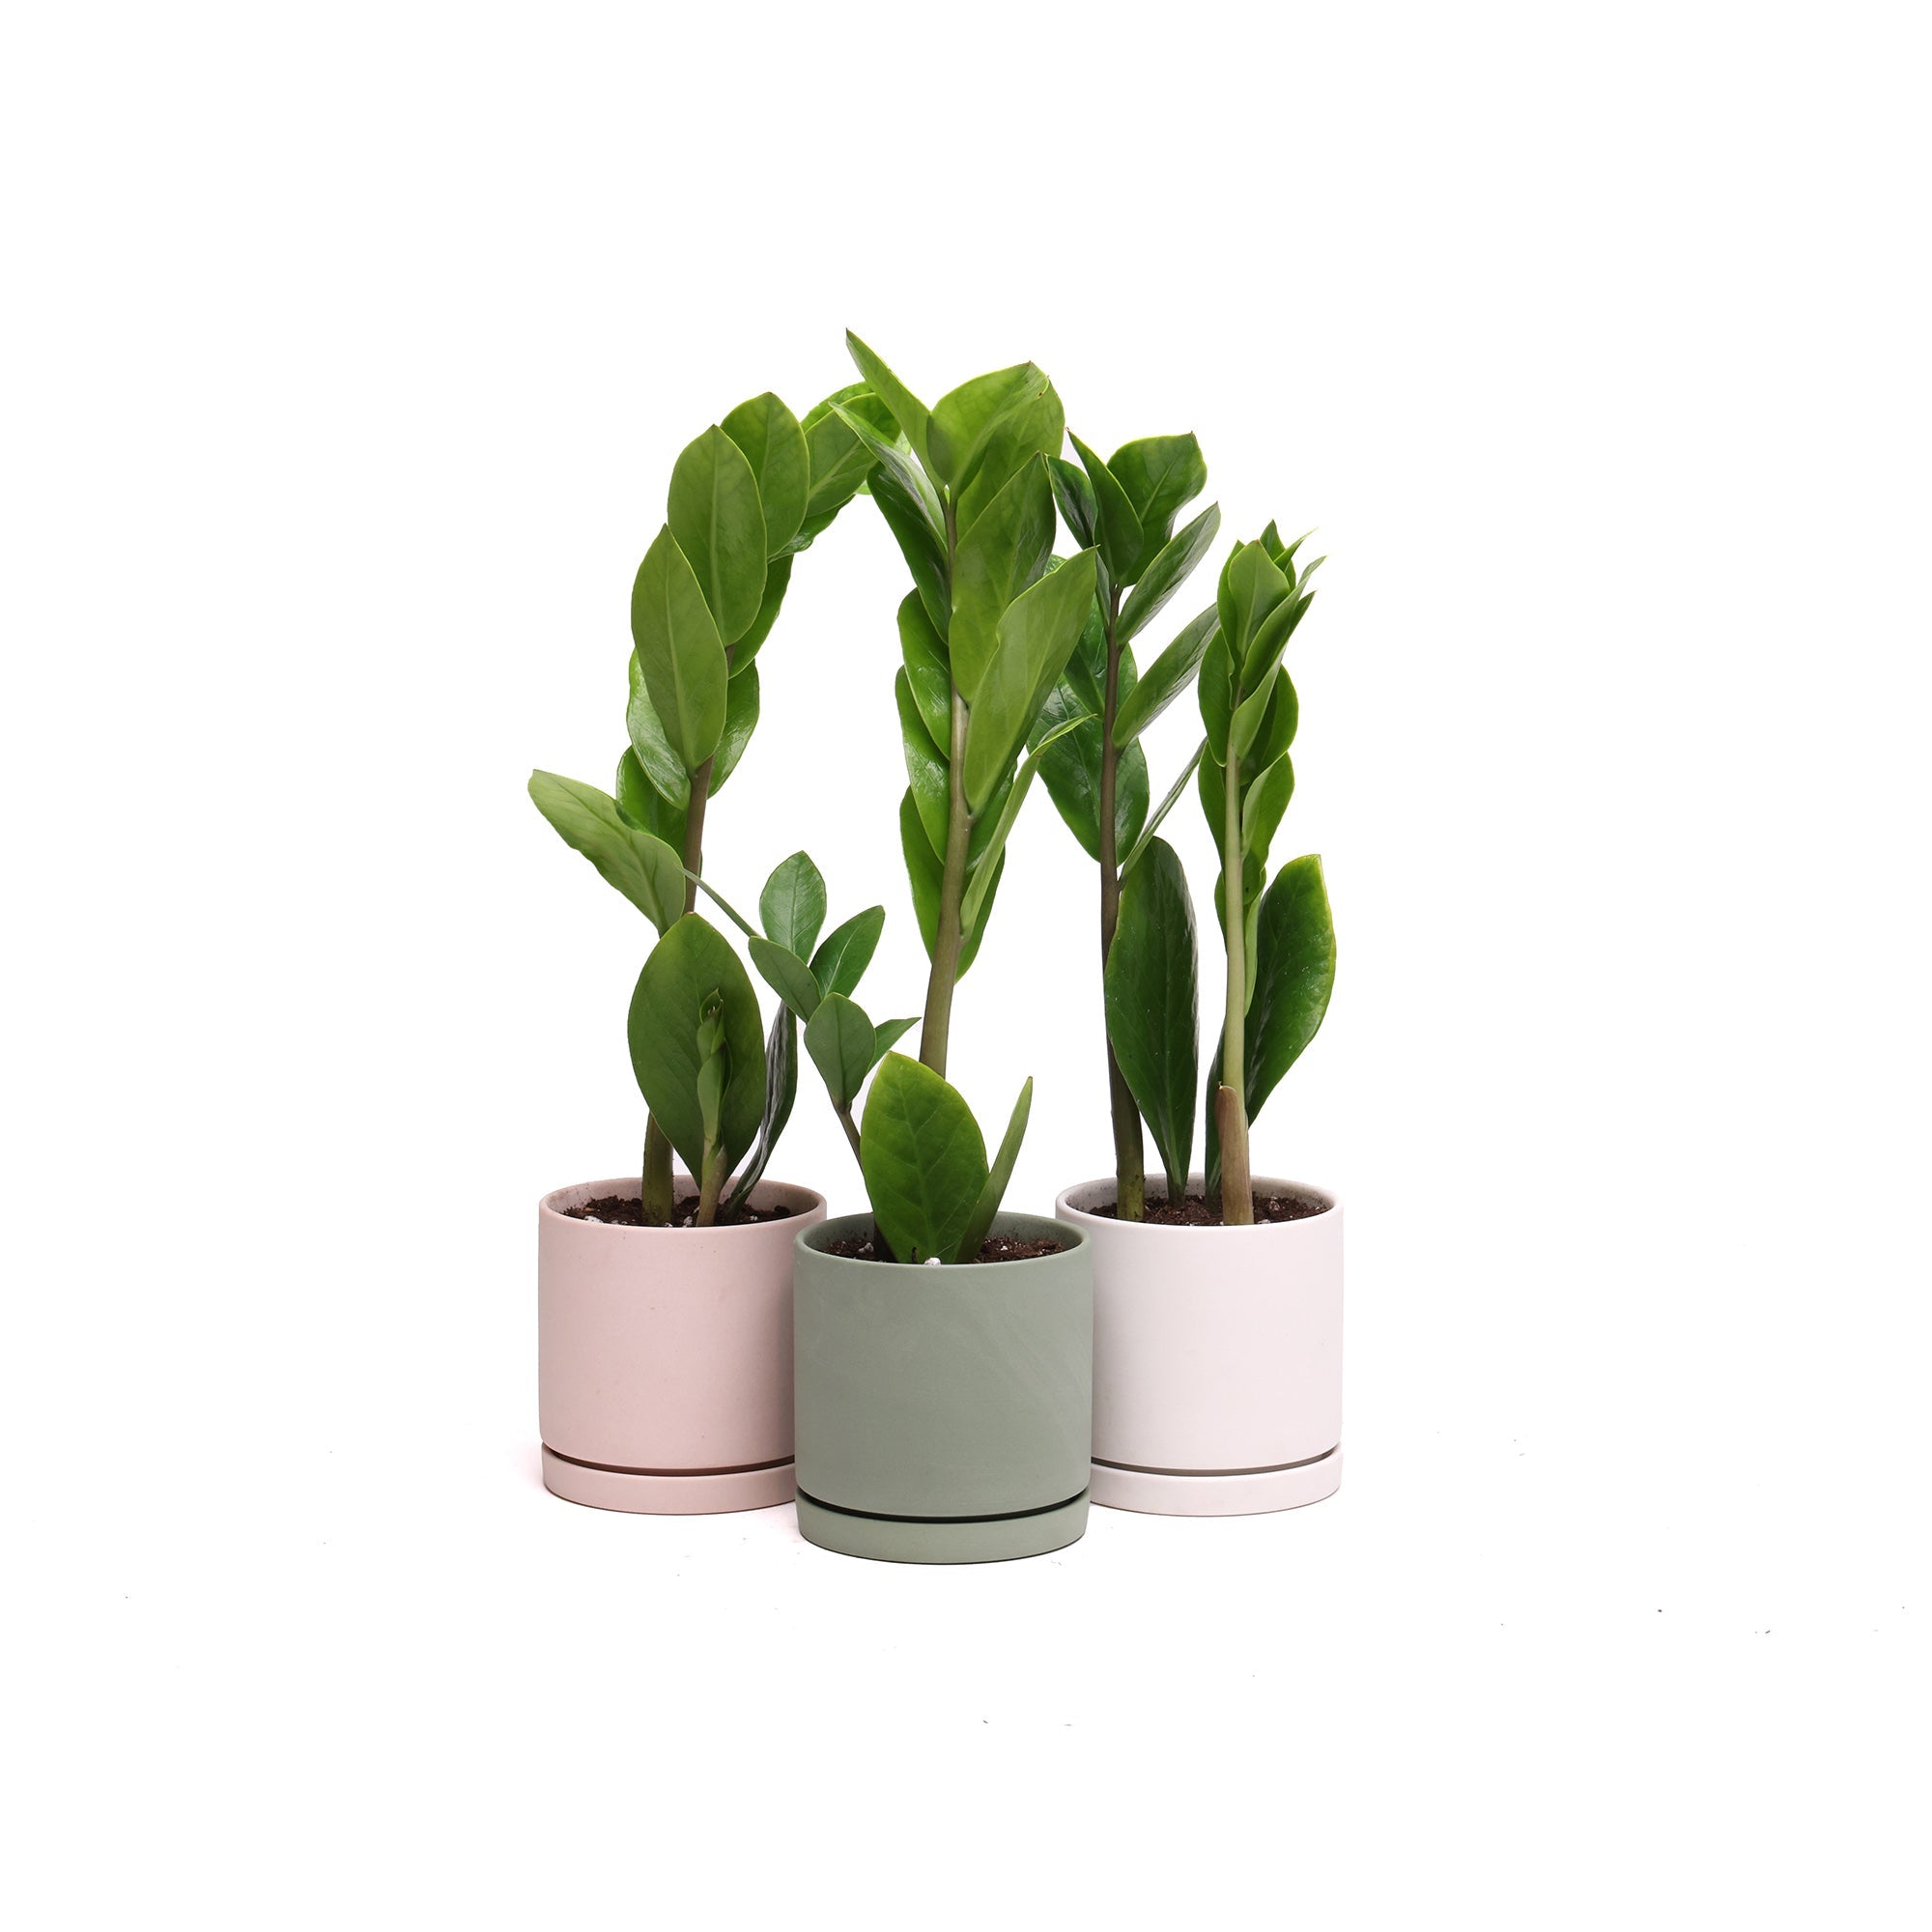 Three Potted ZZ Plants in Dojo 3” pots arranged in a row on a white background.